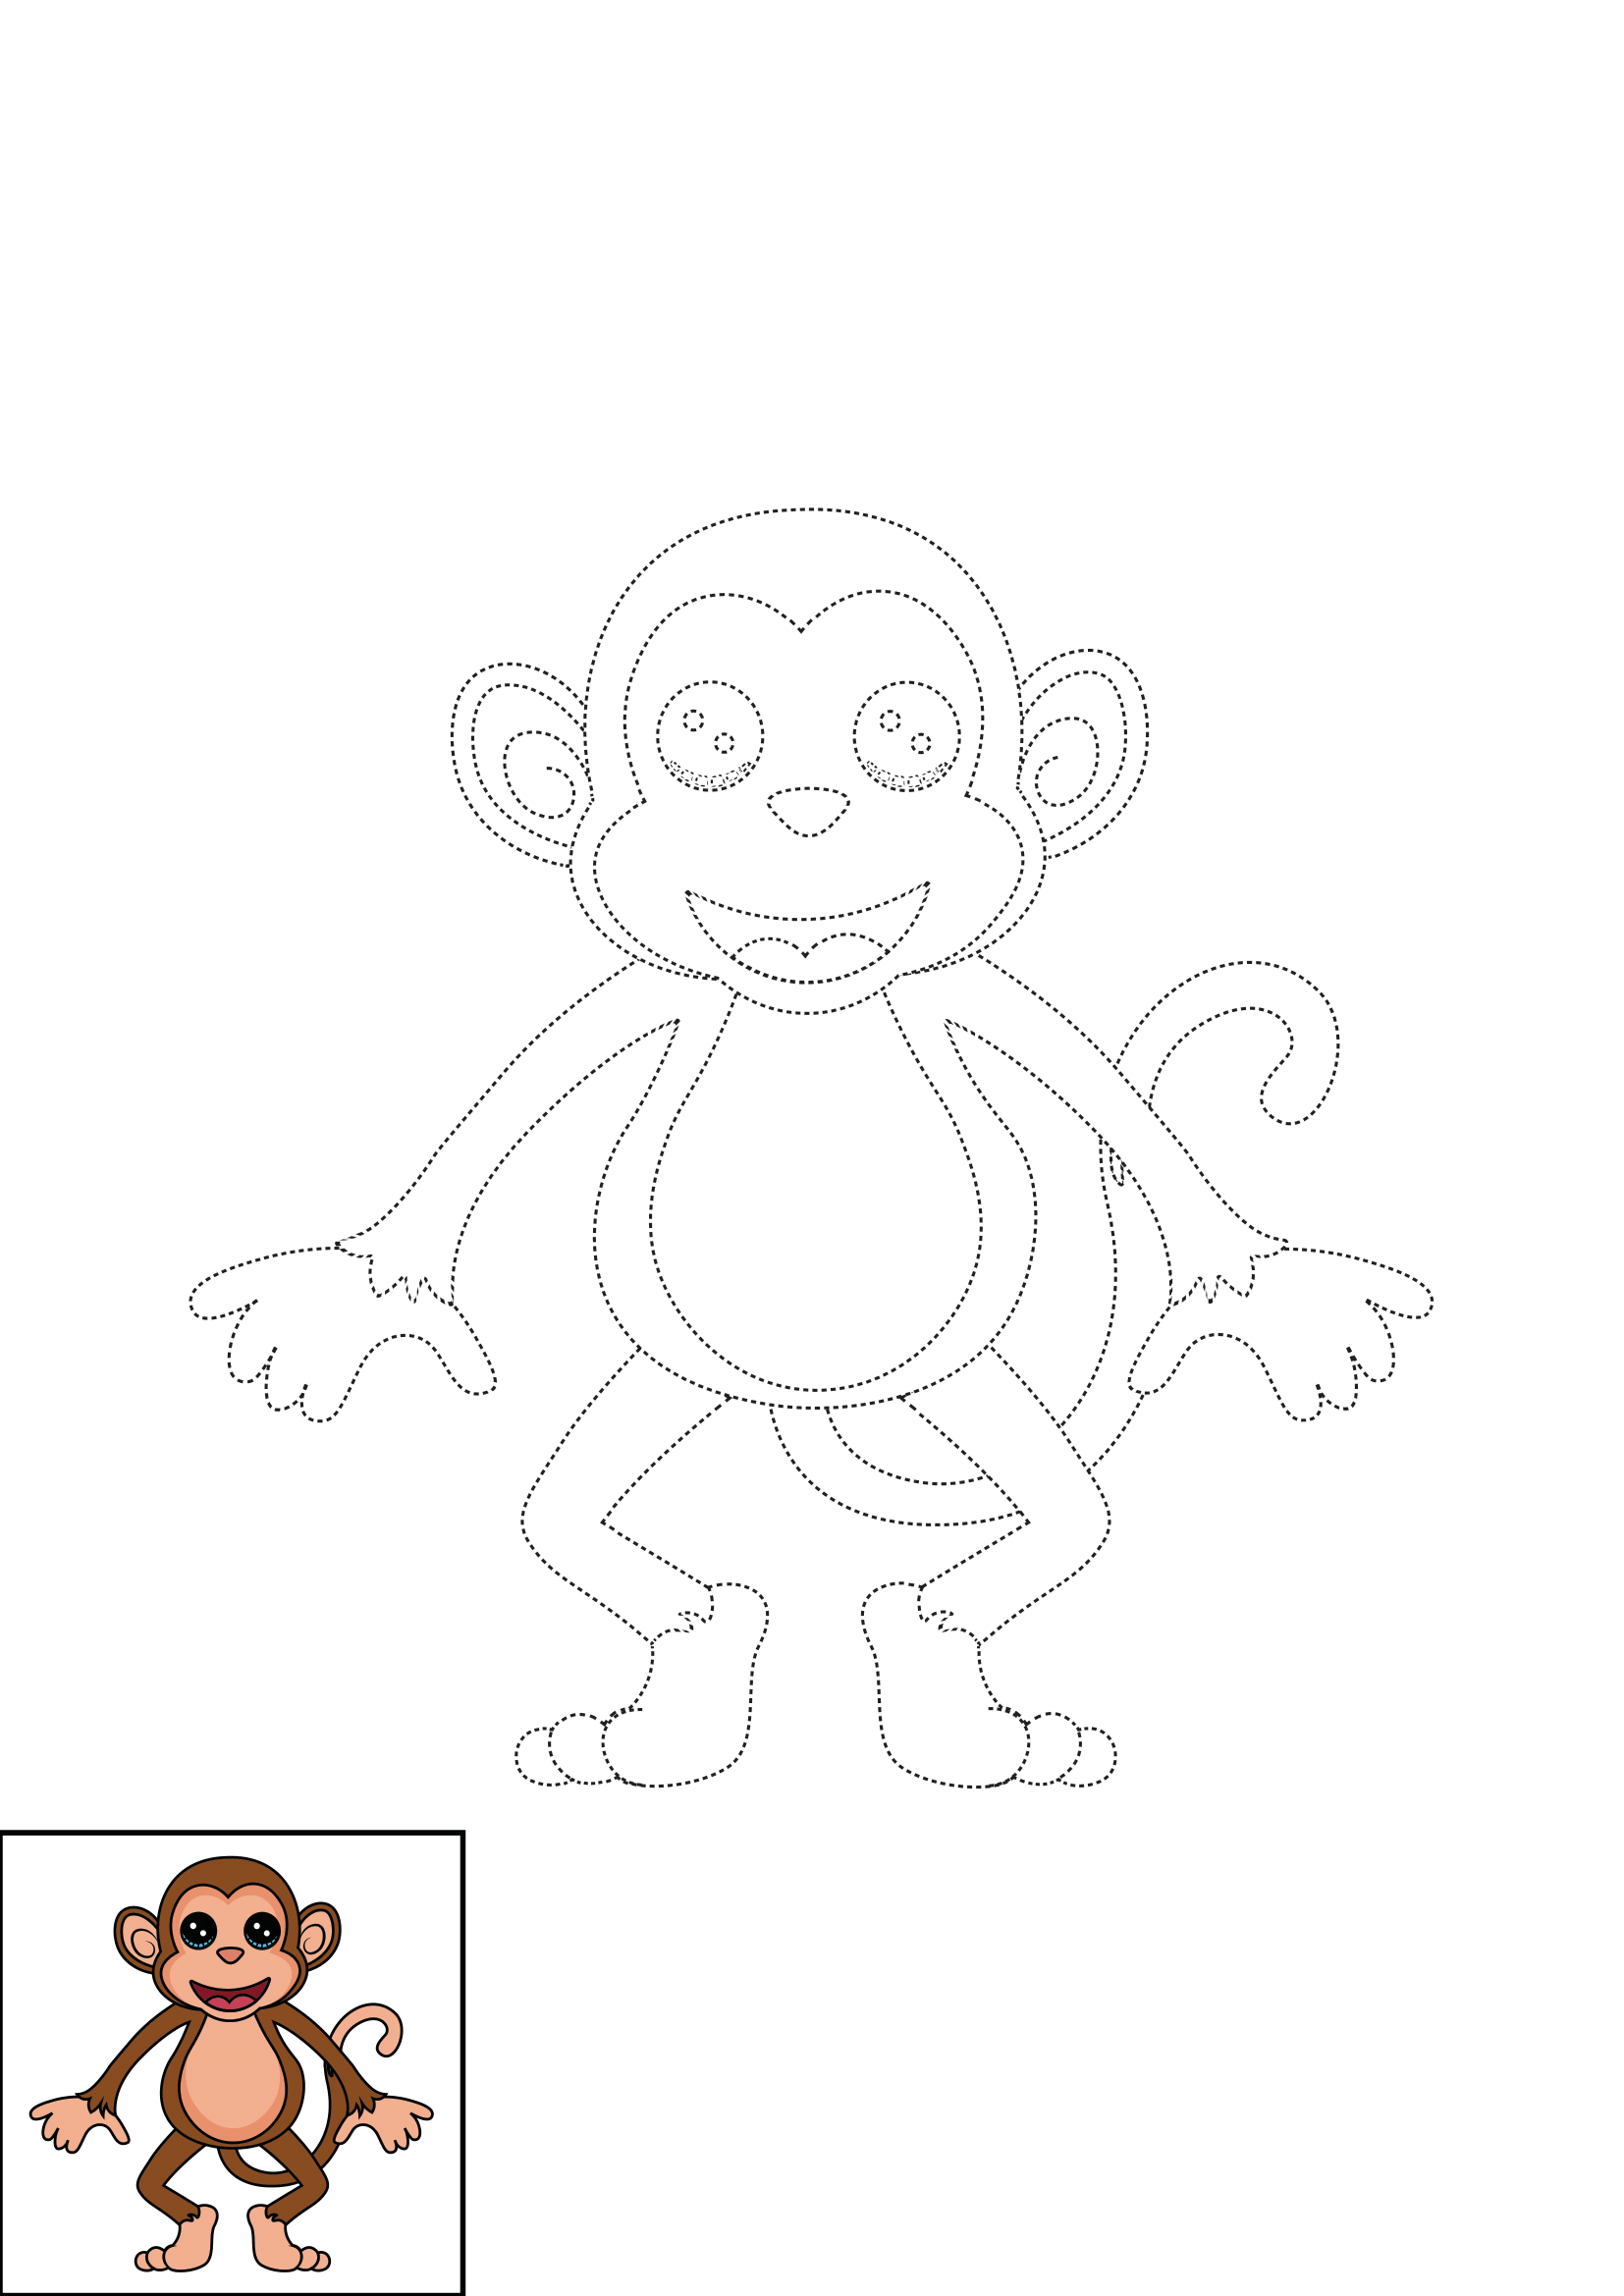 How to Draw A Monkey Step by Step Printable Dotted